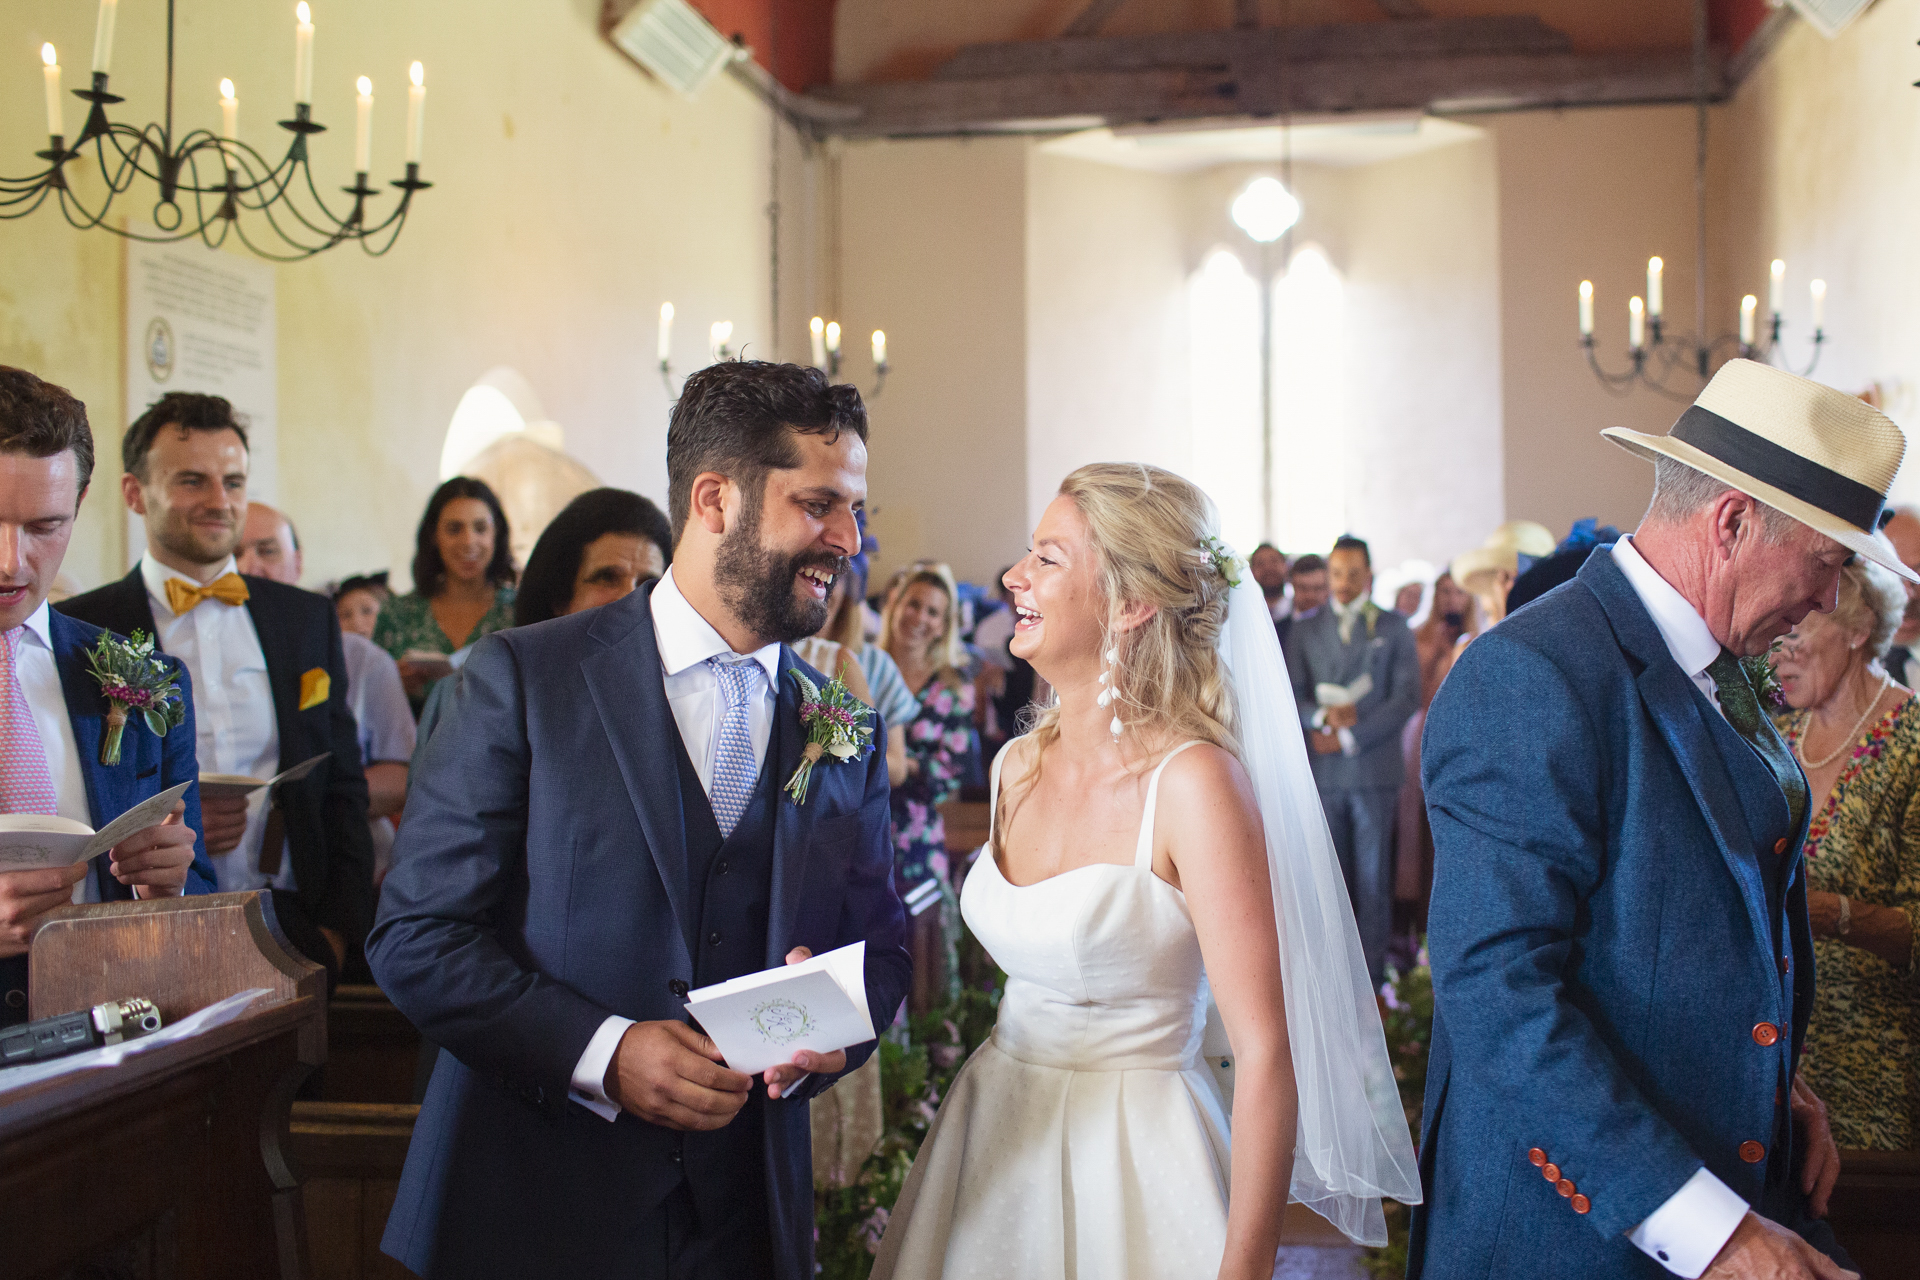 Bride marries groom at Upwaltham Barns in the church